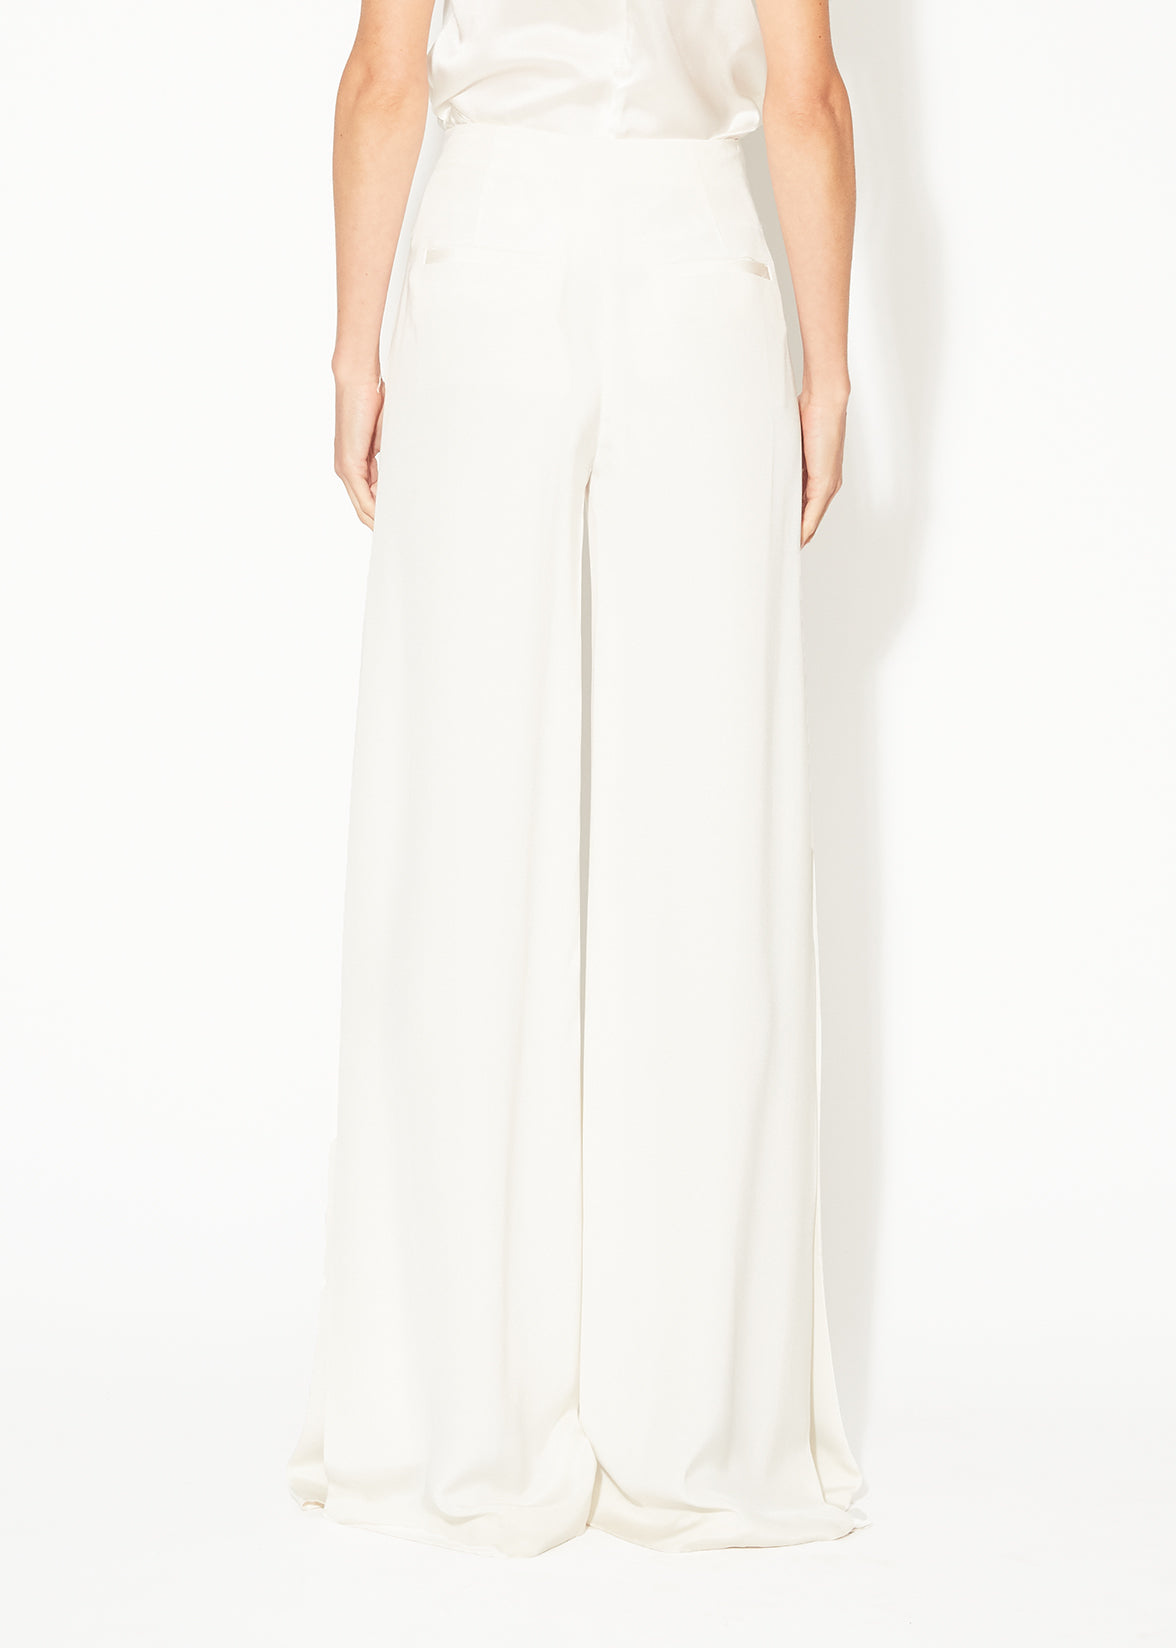 WIDE-LEG PANT WITH CHIFFON INSET IN SILK CREPE